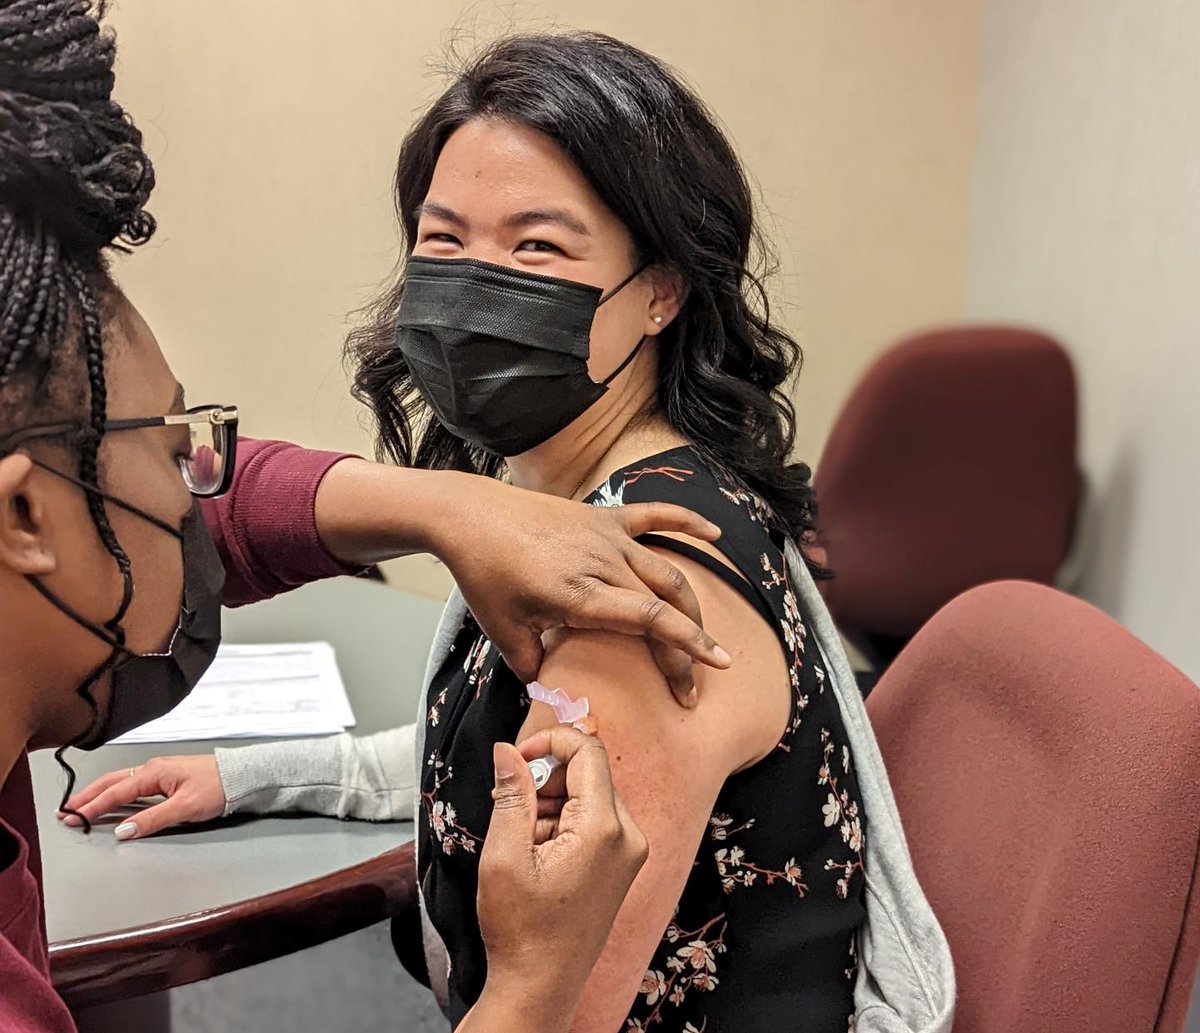 Influenza season is here. Protect yourself and others by getting your flu shot from a participating pharmacy or primary care provider in the community. Today, members of the OHA rolled up their sleeves for their annual vaccination. #getyourflushot